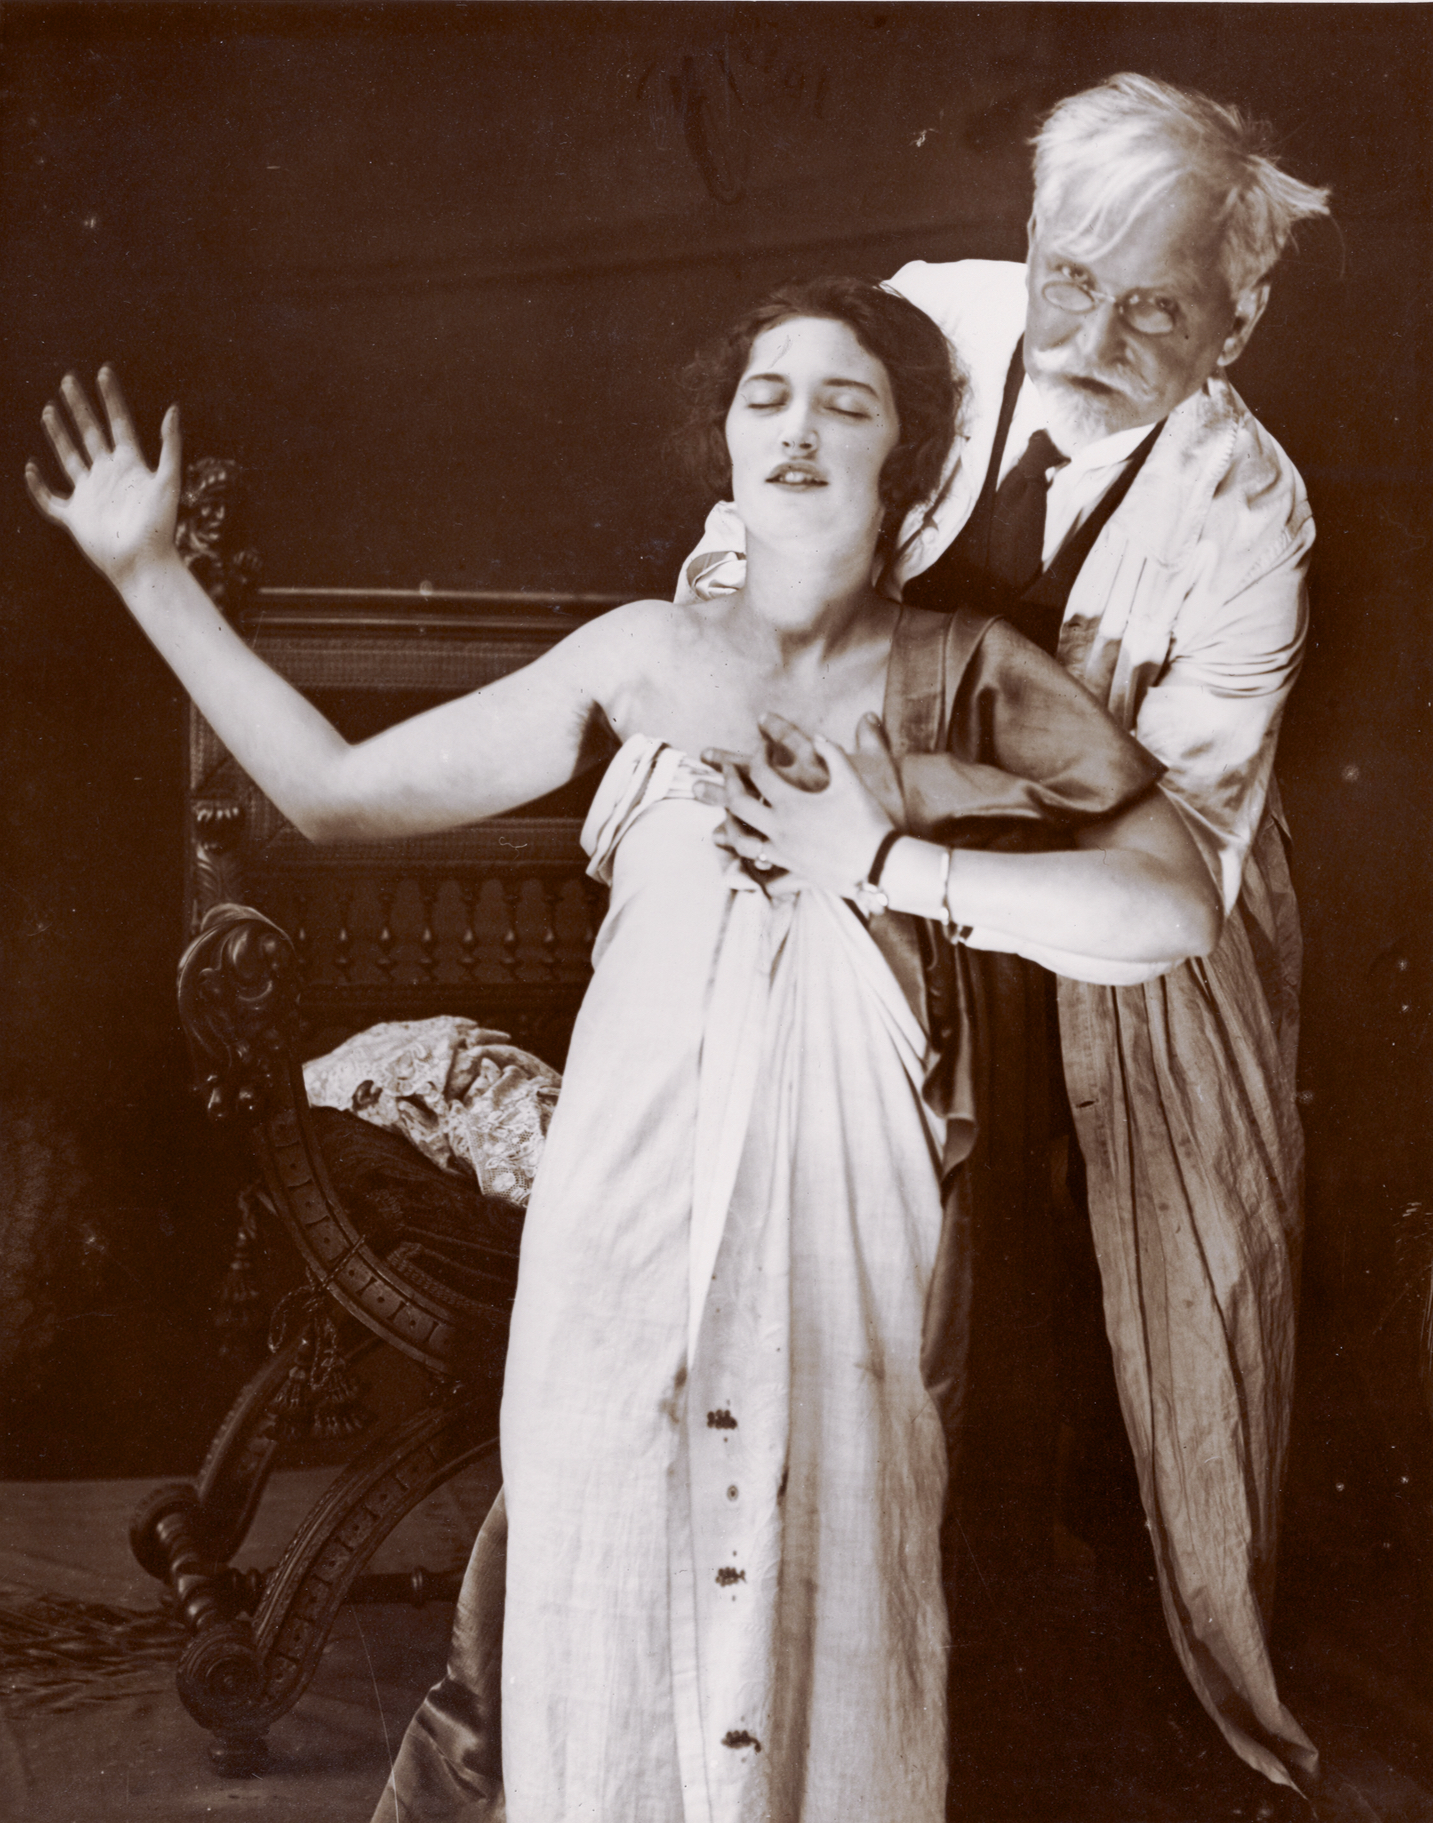 Alphonse-Mucha-in-Costume-with-Daughter-Jaroslava-as-a-Model-for-the-Poster-De-Forest-Phonofilm-the-first-talkie-shown-in-the-Bio-Adria-cinema-Prague-Zbiroh-Bohemia-c.1927.jpg